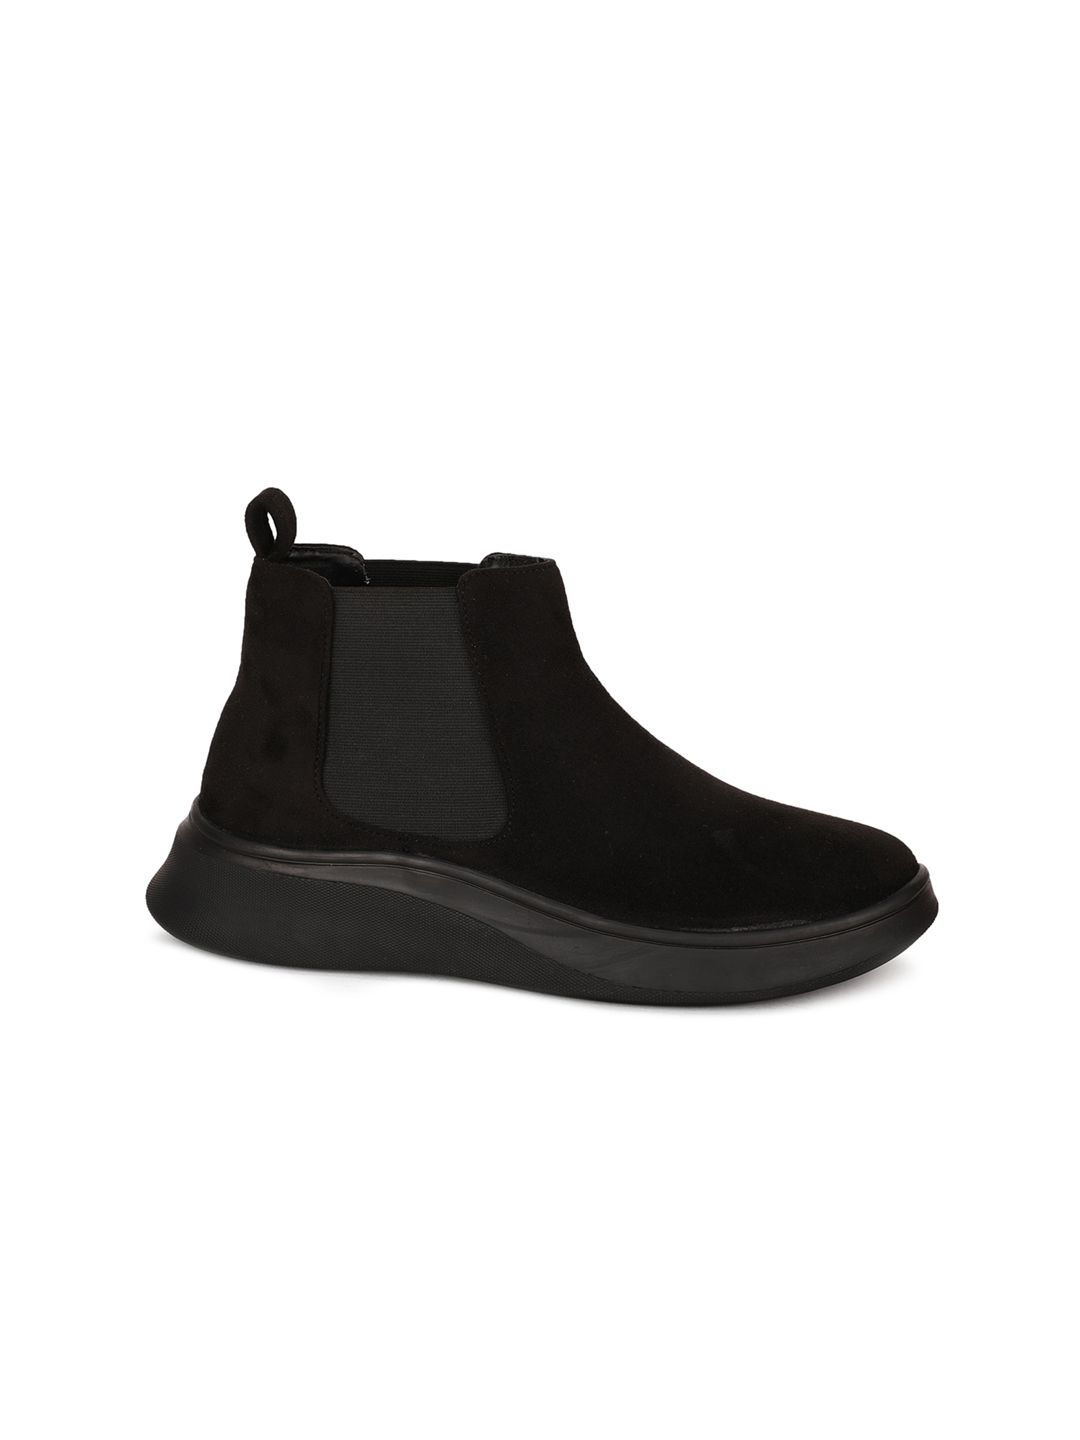 Bruno Manetti Black Suede Wedge Heeled Boots Price in India